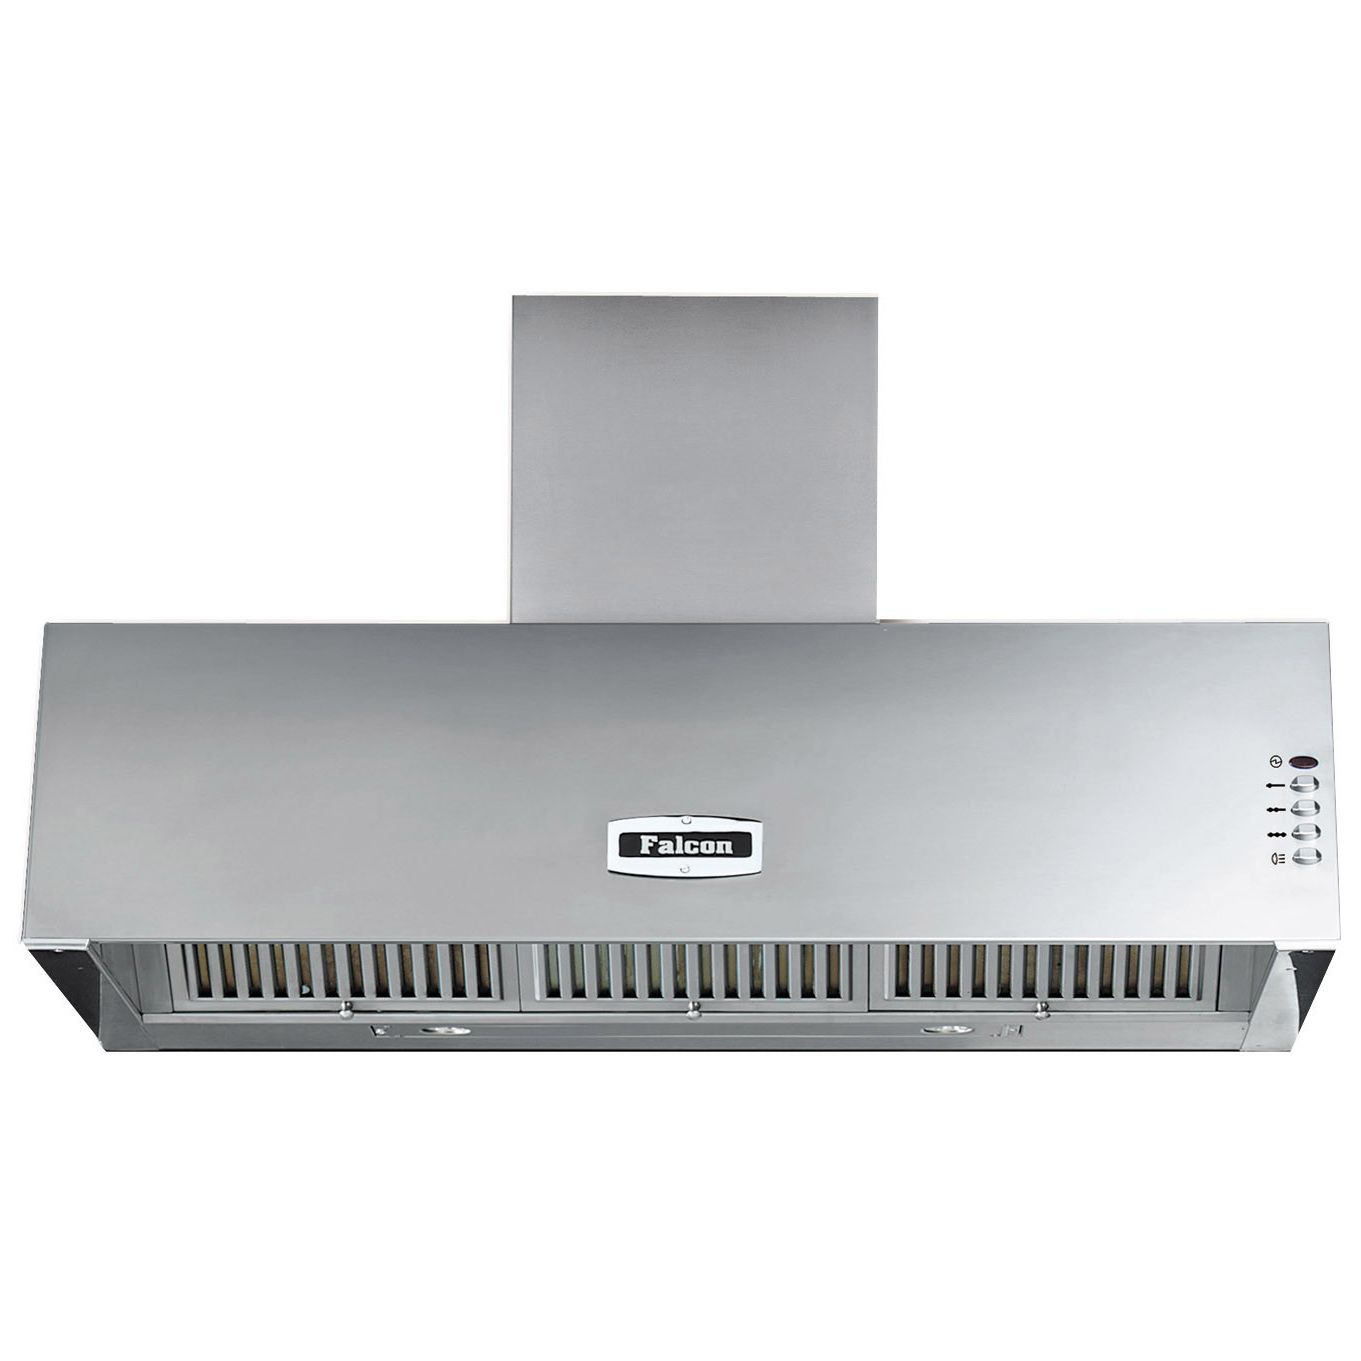 Falcon 1200XT Cooker Hood, Stainless Steel at John Lewis